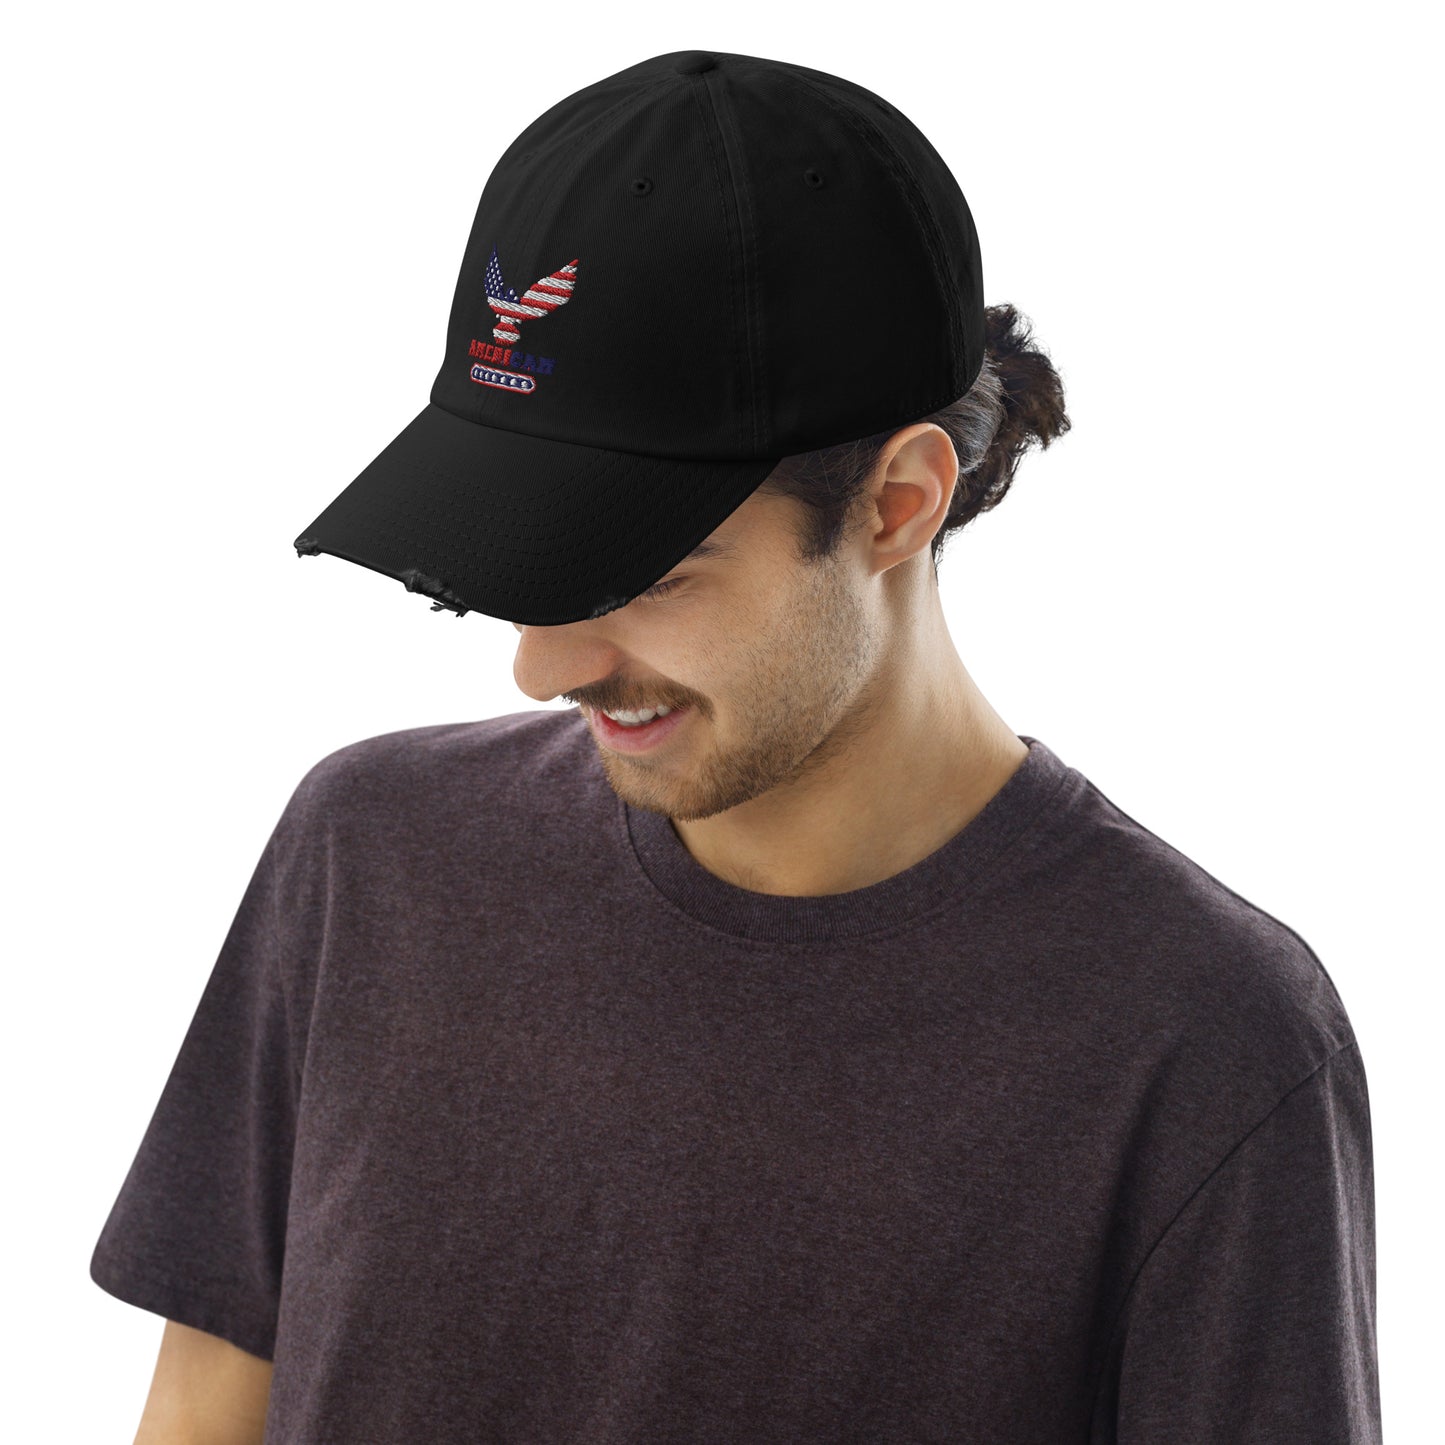 PATRIOTIC AMERICAN STYLE BASEBALL CAP BLACK RIGHT FRONT - www.firstamericanstore.com